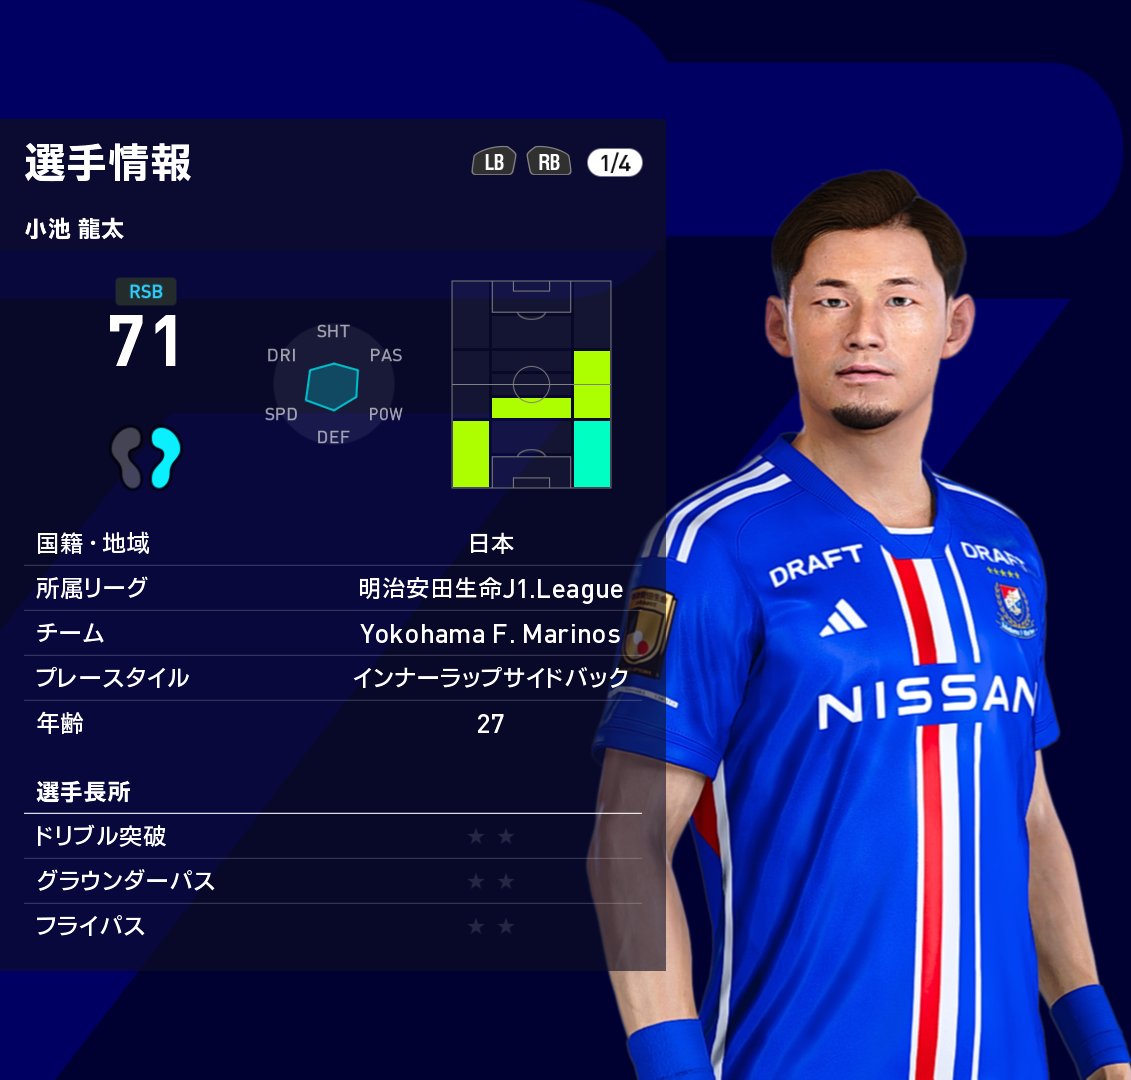 Face convert from efootball to PES2021

#PES2021 #Facemod #Jleague #eFootball2023 #FaceConvert